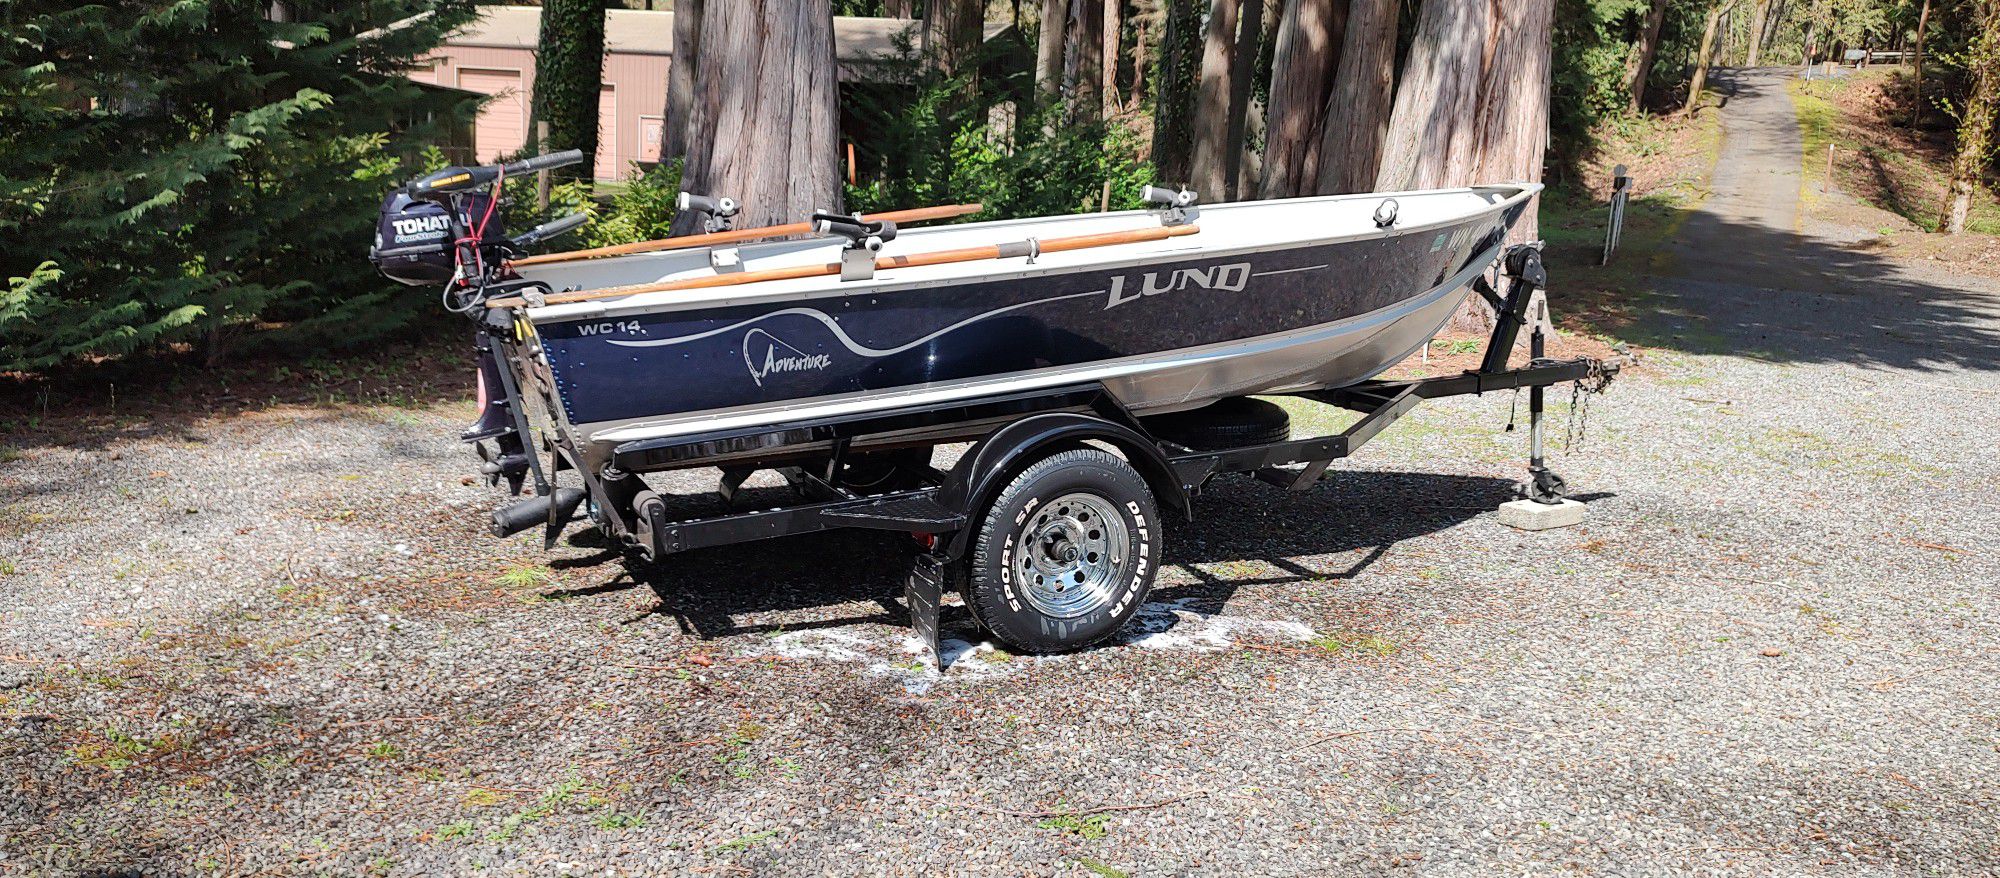 2000-14 Ft Lund Boat And Trailer.